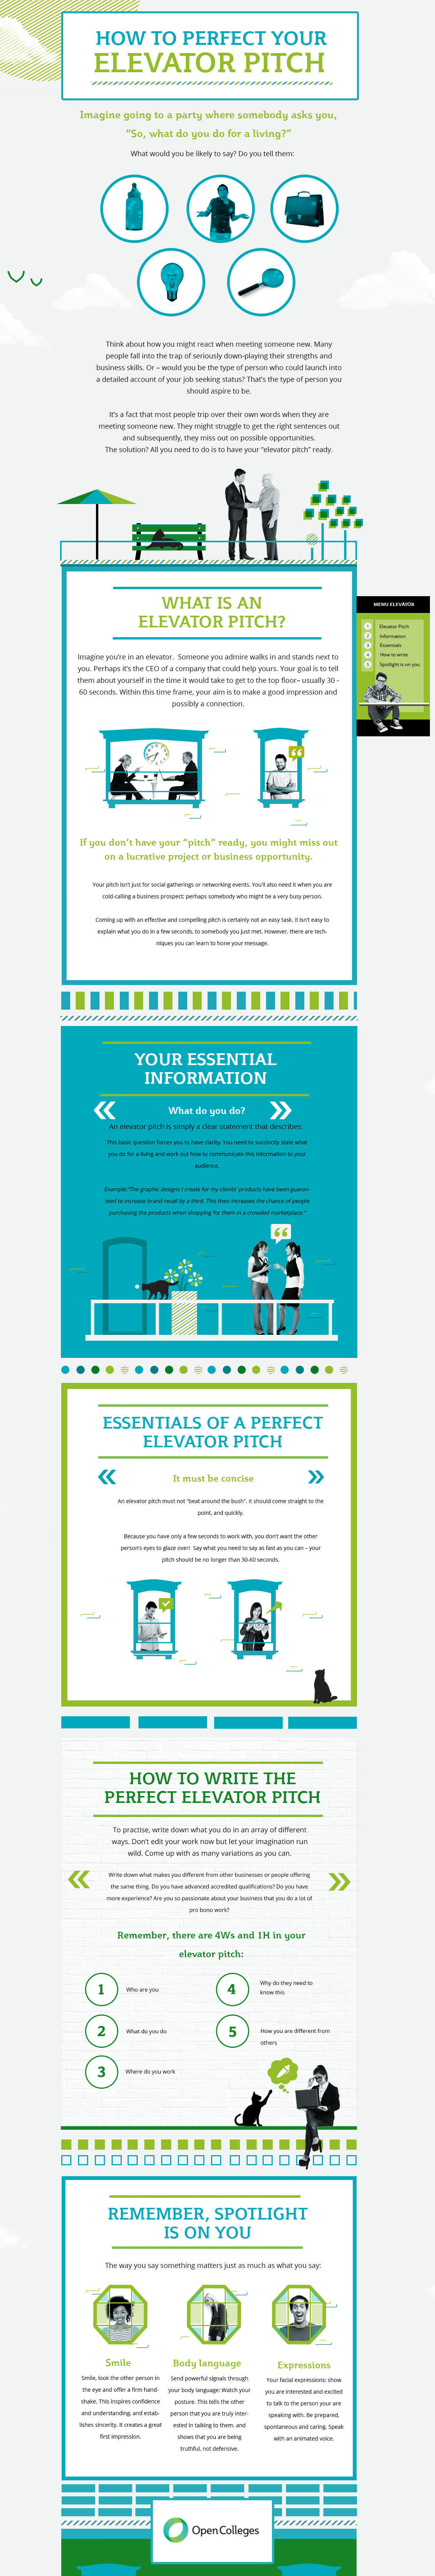 How to Perfect Your Elevator Pitch